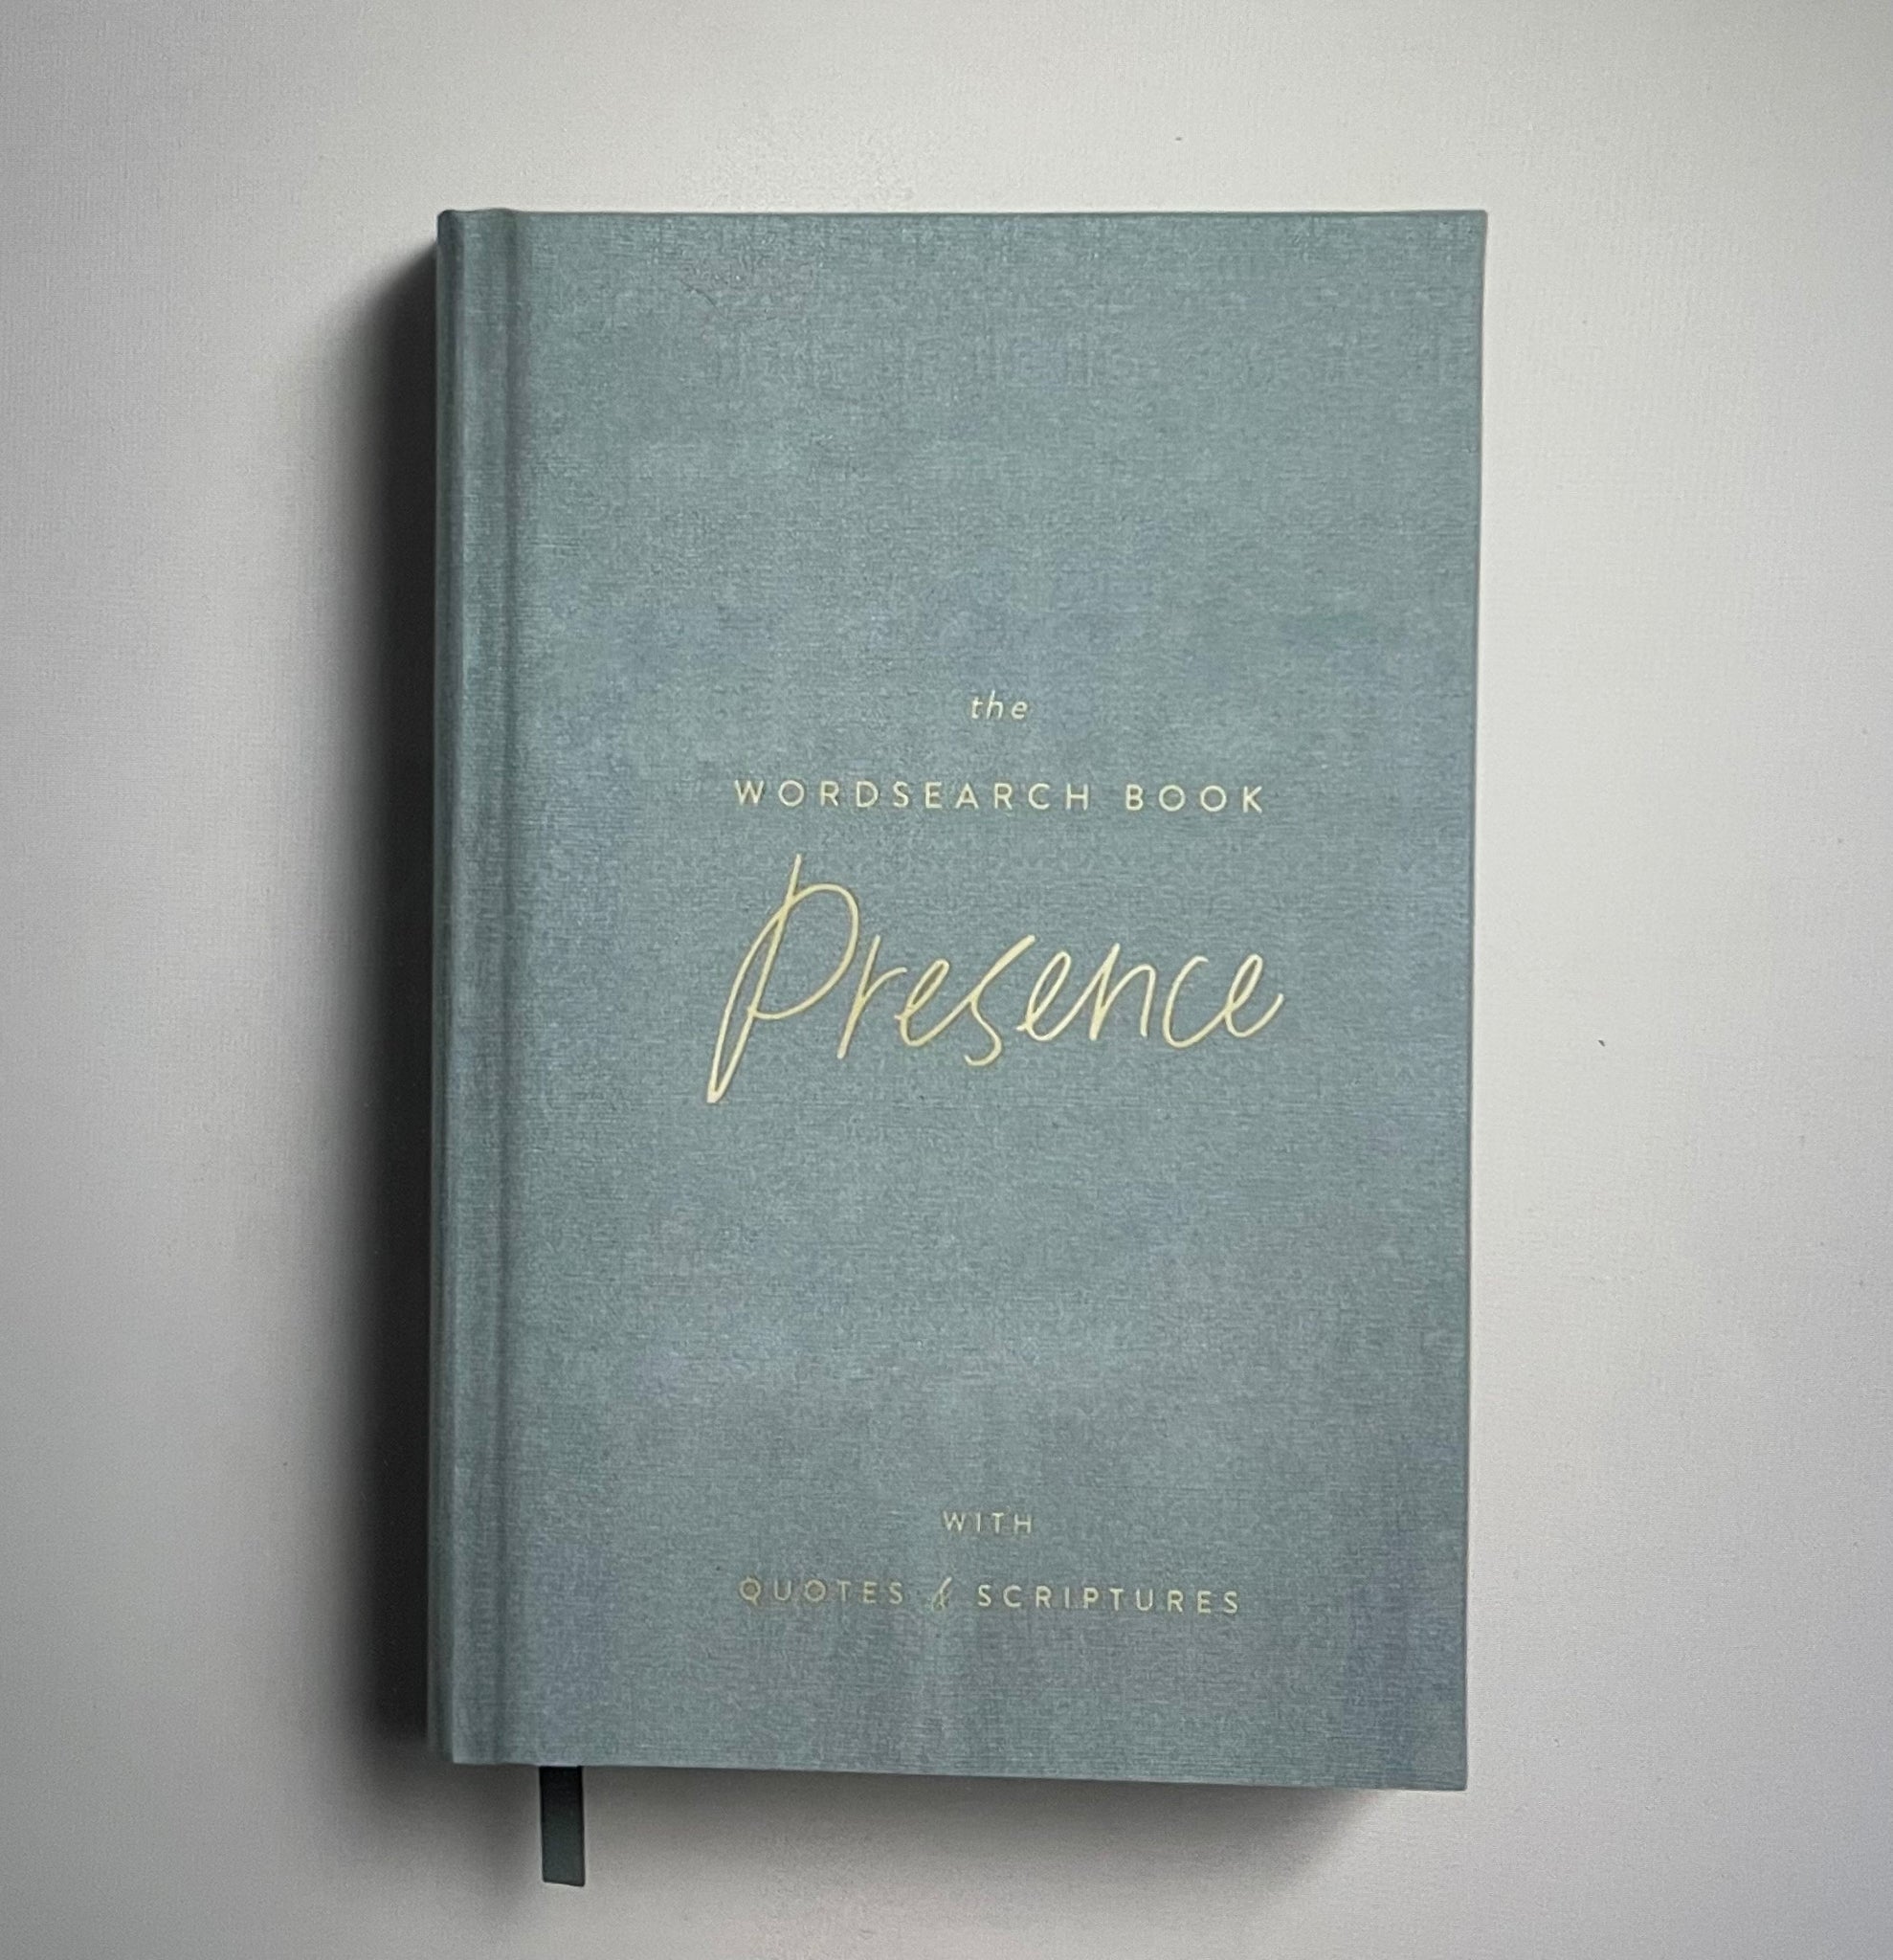 The Wordsearch Book: Presence with Quotes & Scriptures